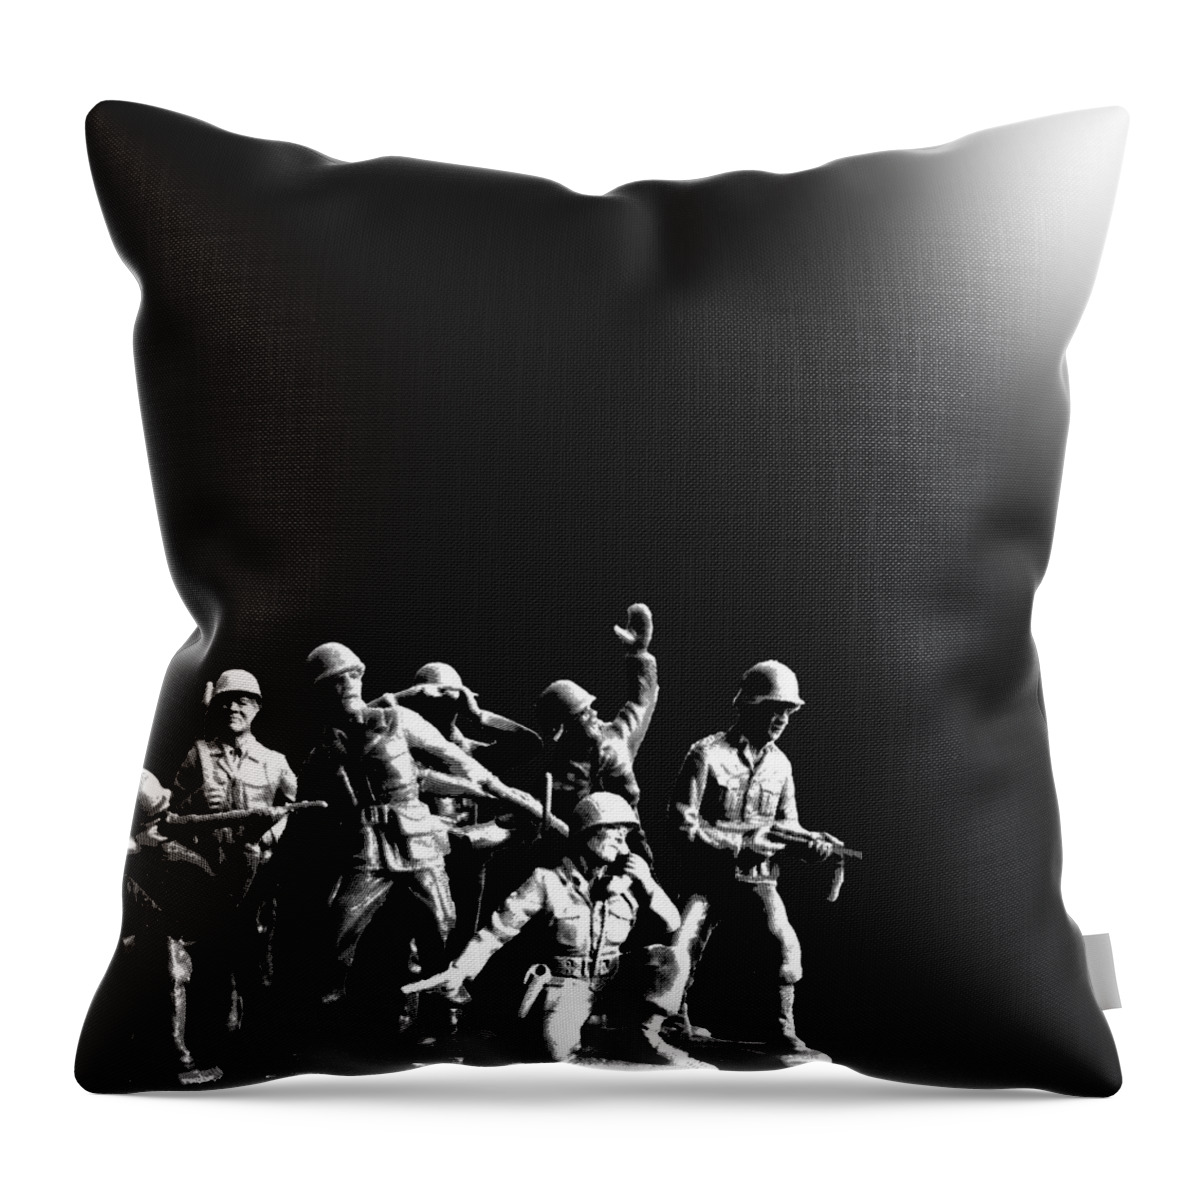 Man Throw Pillow featuring the painting Plastic Army Man Battalion Black and White by Tony Rubino